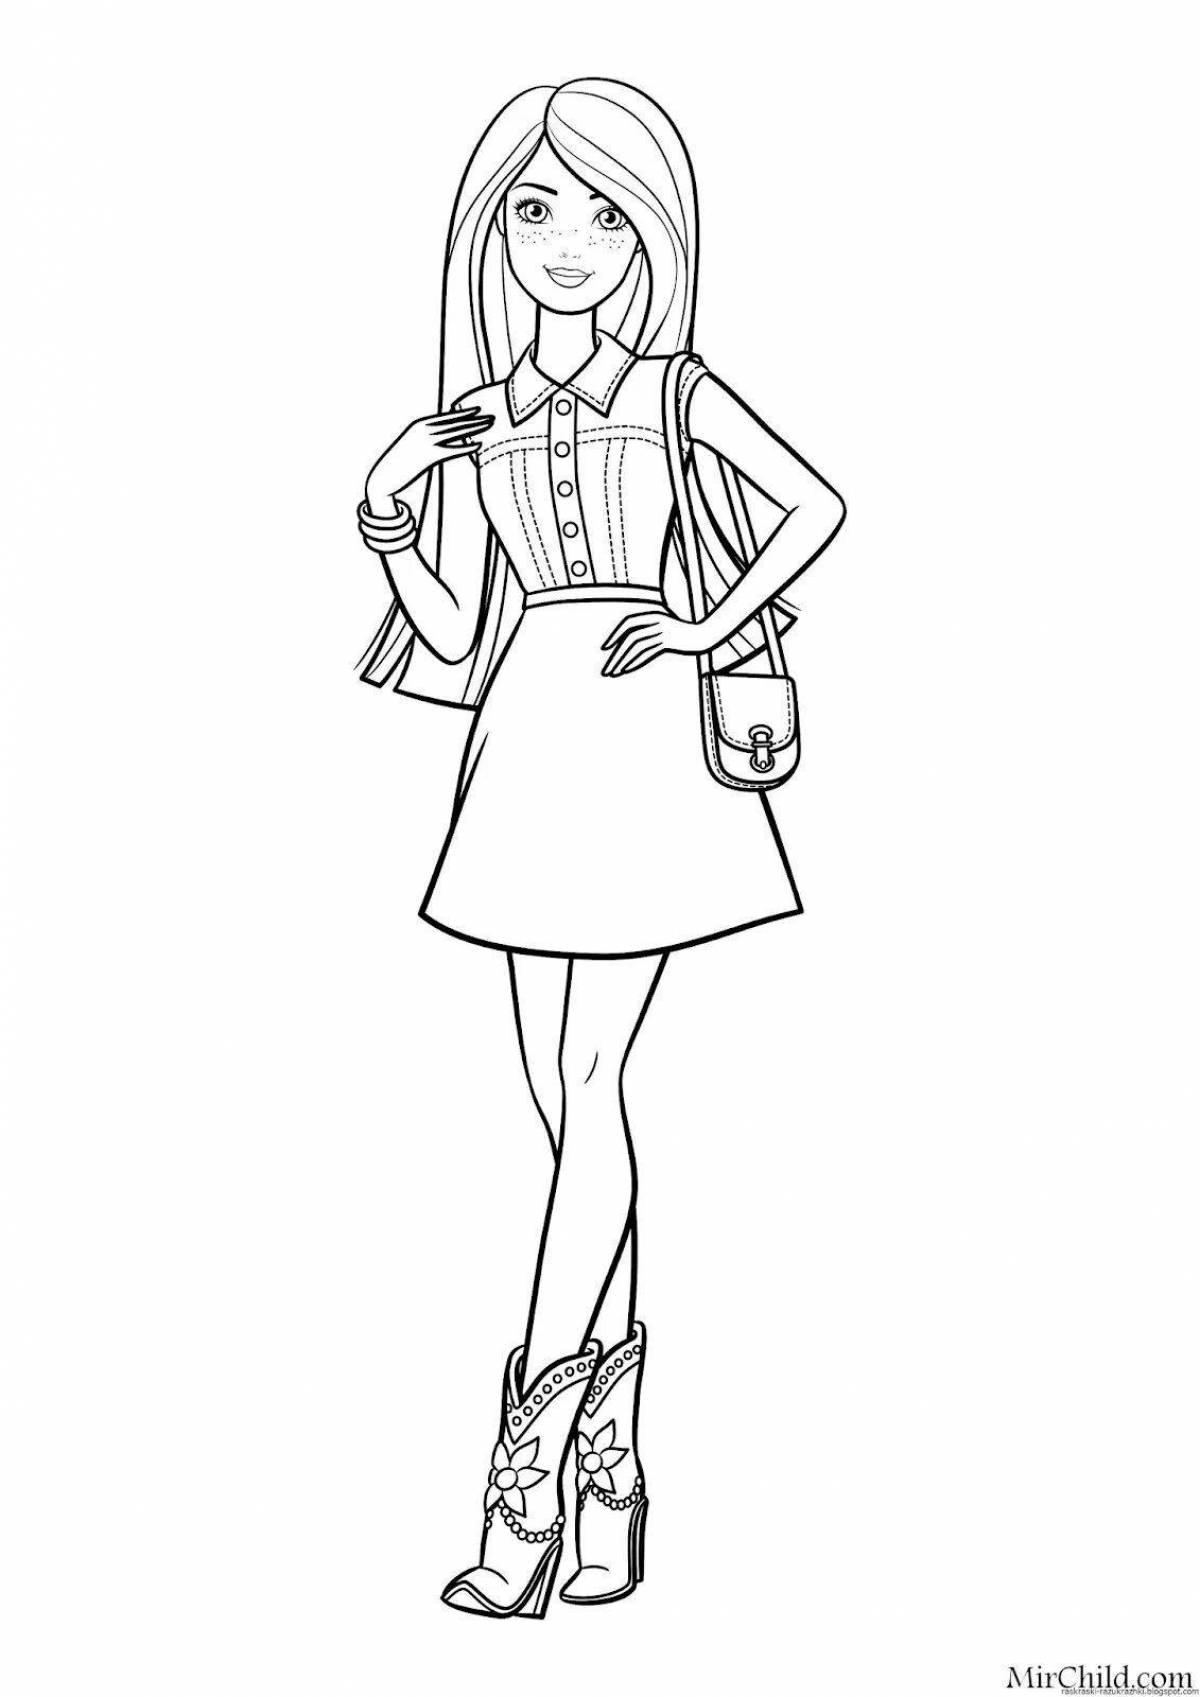 Full body zingy coloring page girl